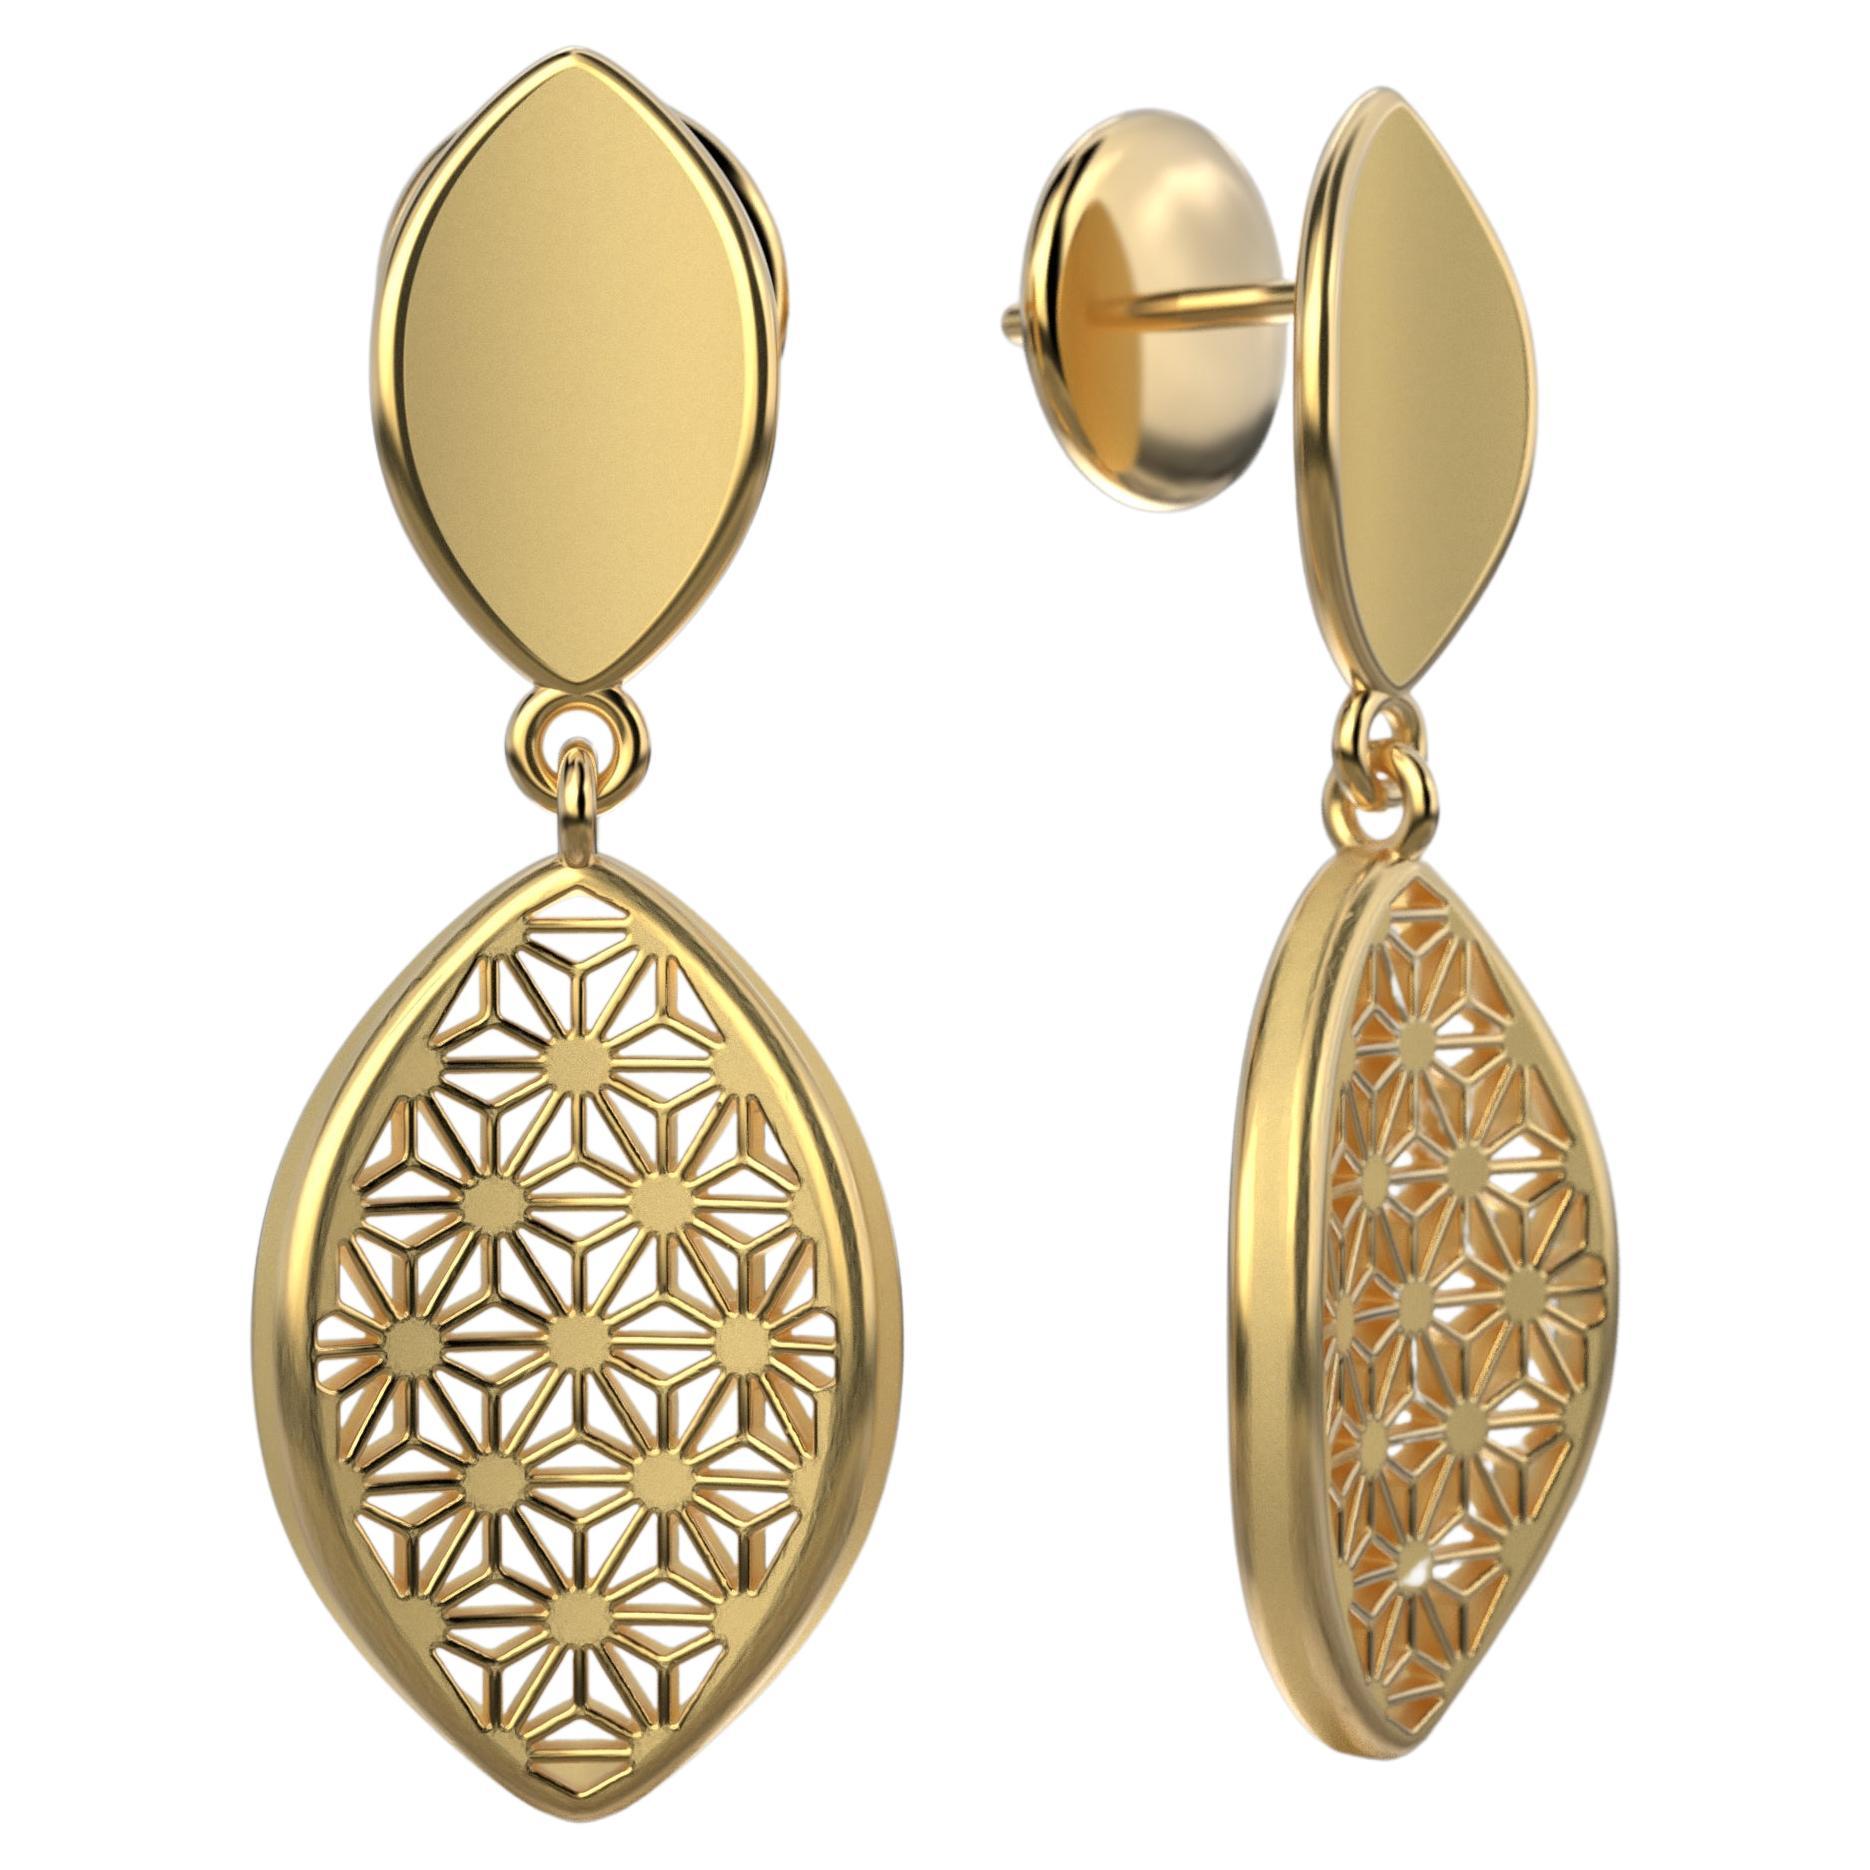 Sashiko Pattern Earrings Made in Italy in 18k Gold By Oltremare Gioielli